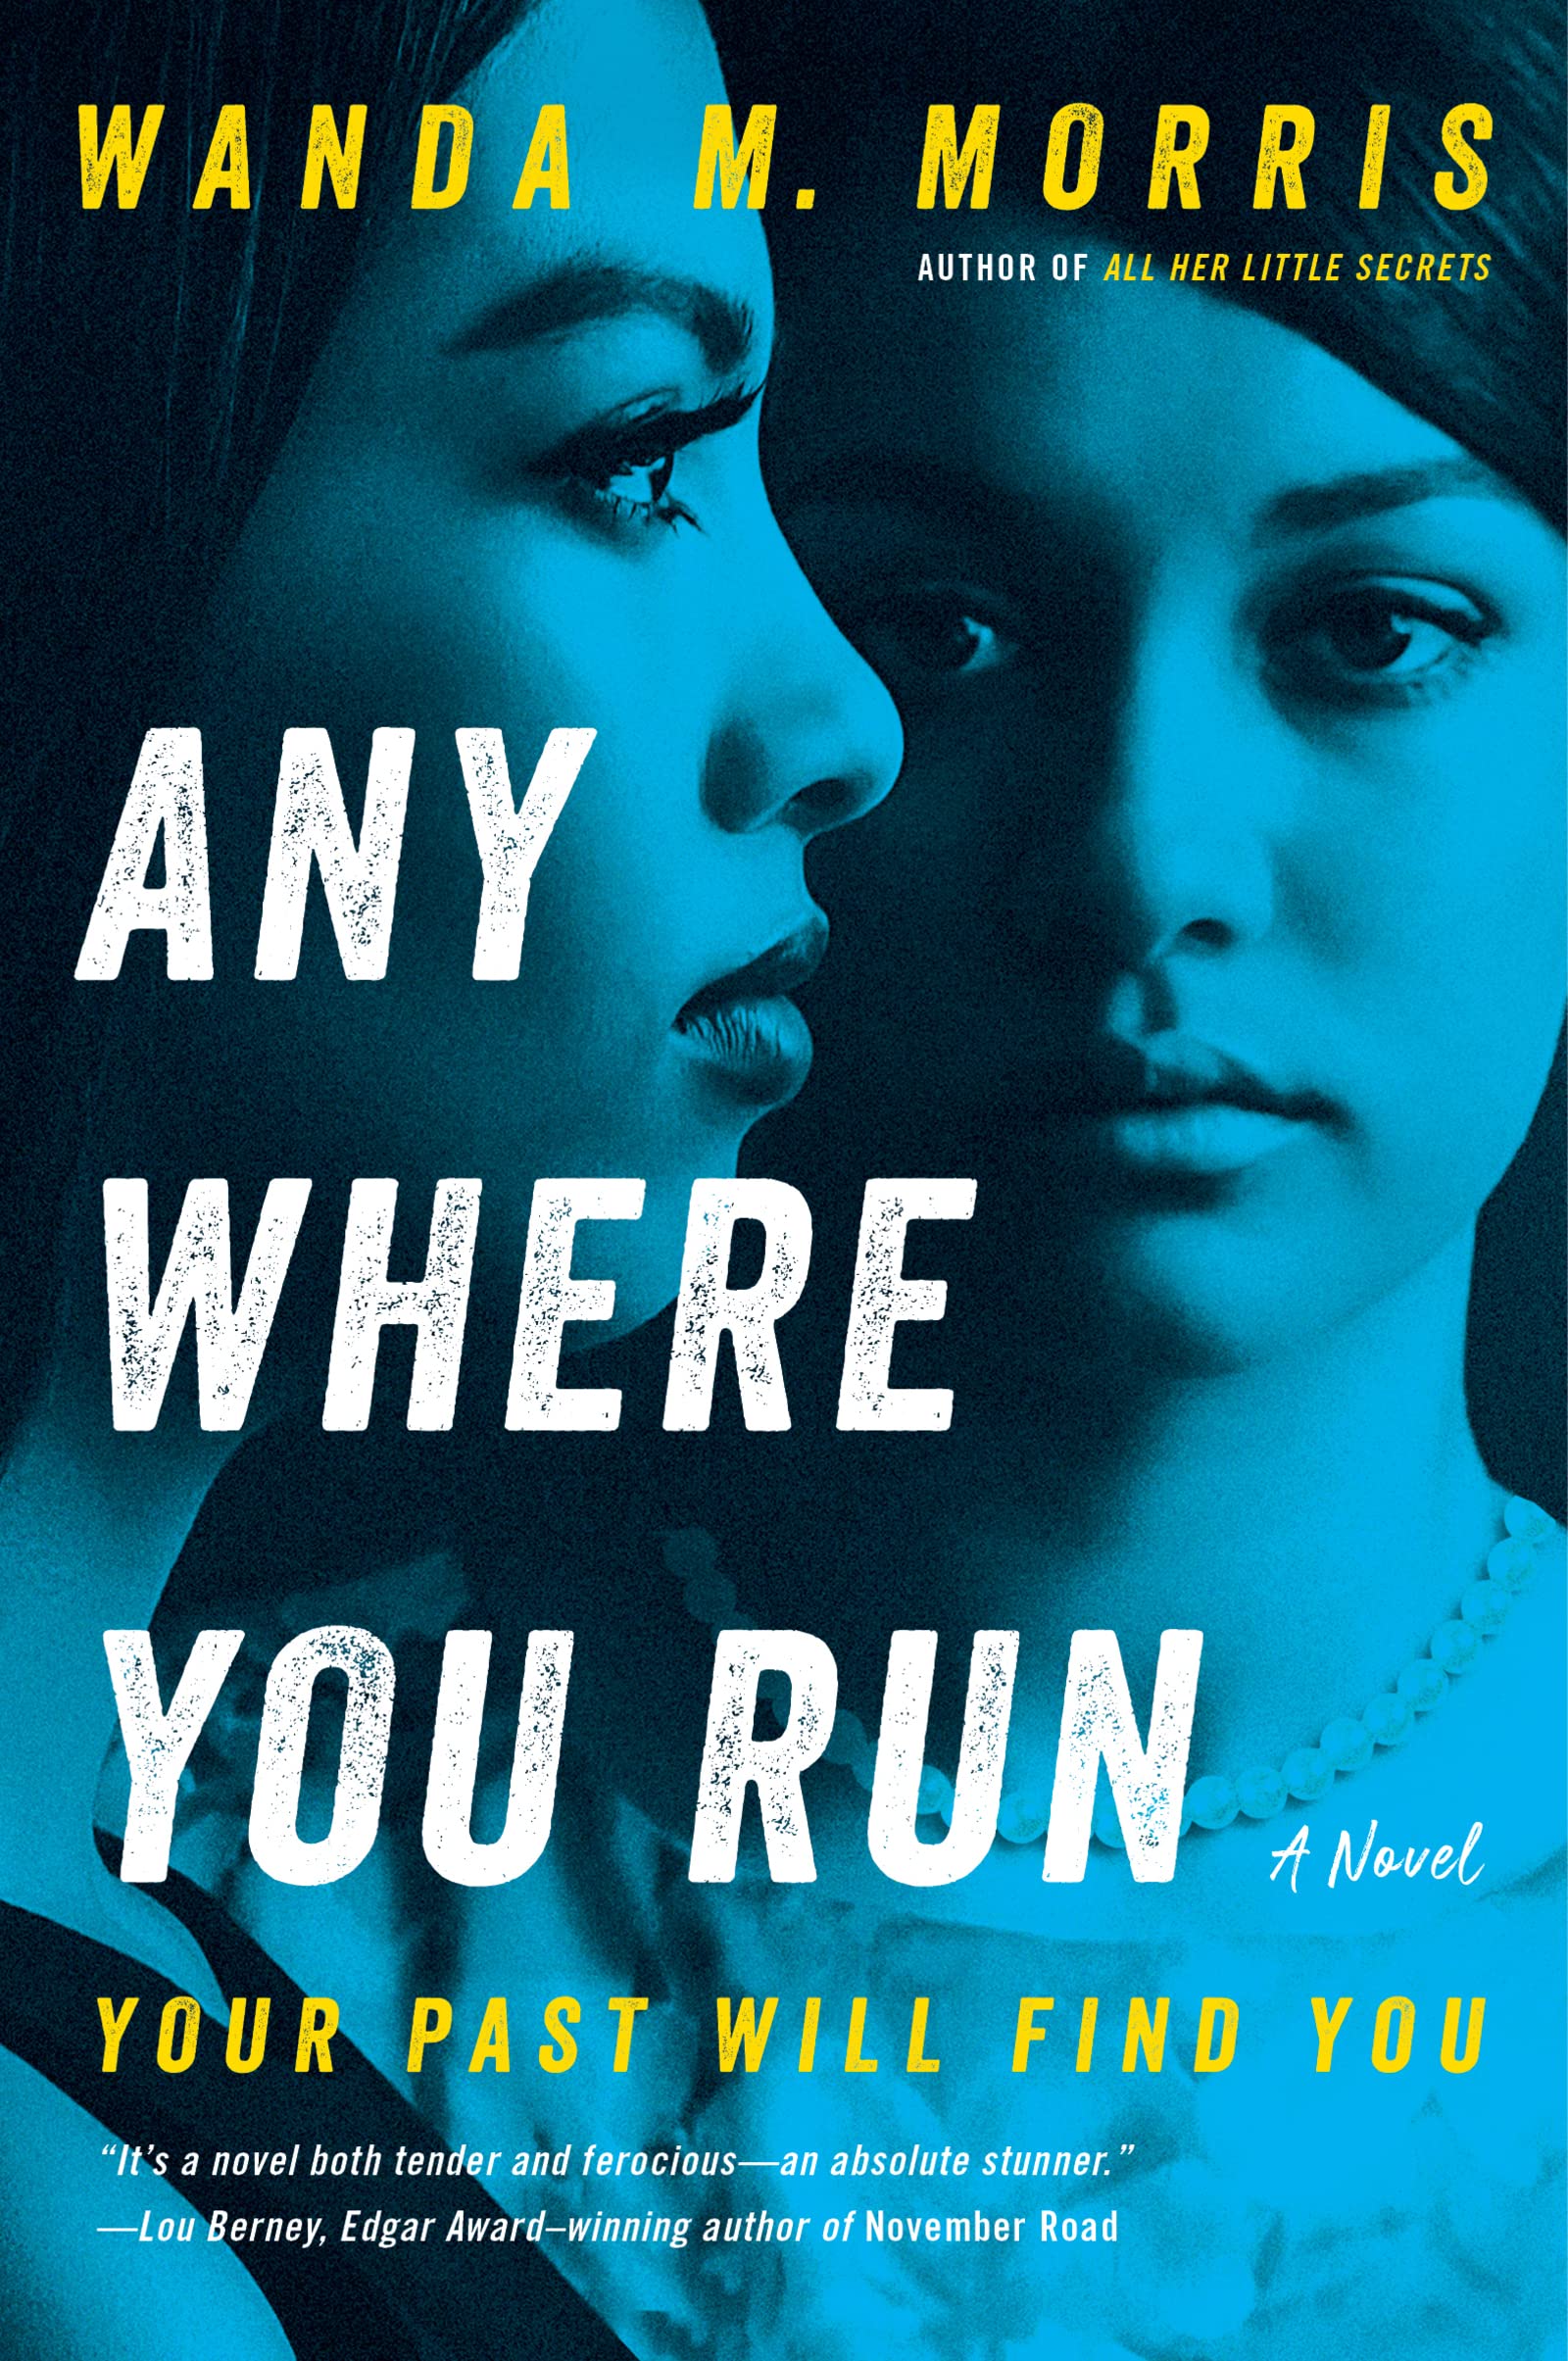 Image for "Anywhere You Run"